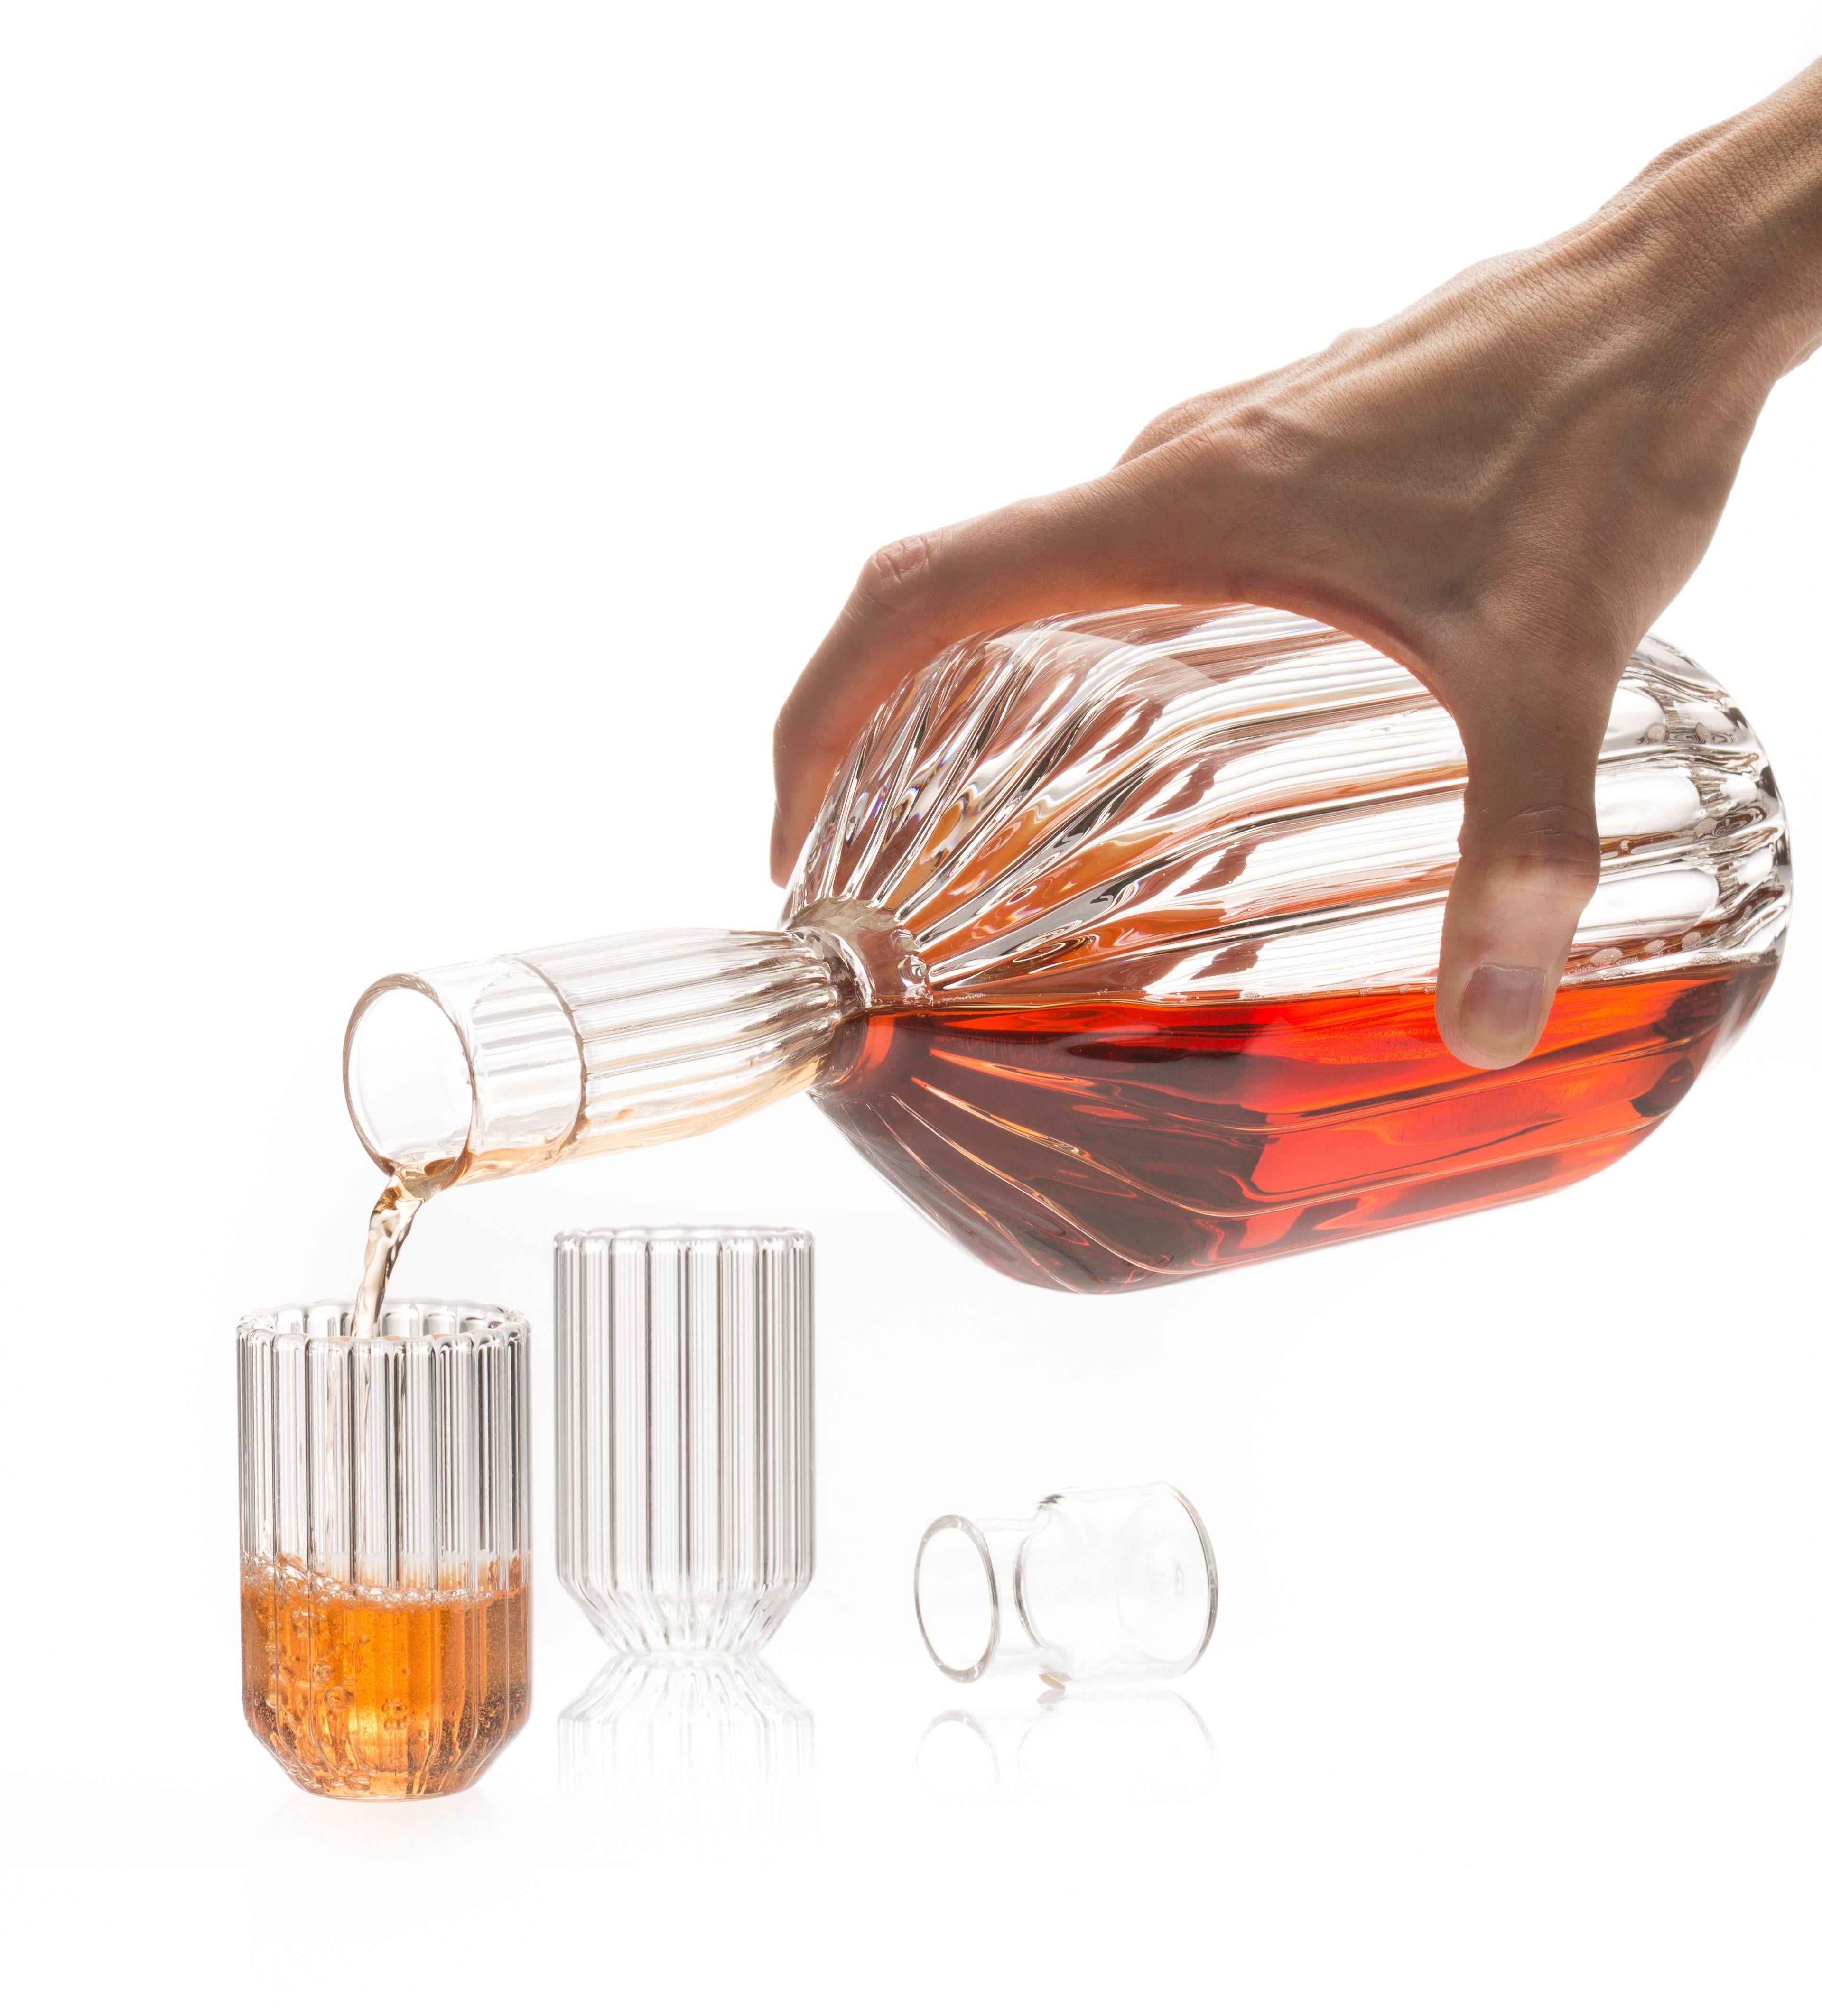 Margot Decanter and eight Dearborn Liqueur Shot Mini clear glass set

Entirely hand-formed without the use of molds, the contemporary minimal Margot Decanter is an ideal companion to any evening spent enjoying your favorite port, scotch, bourbon, or